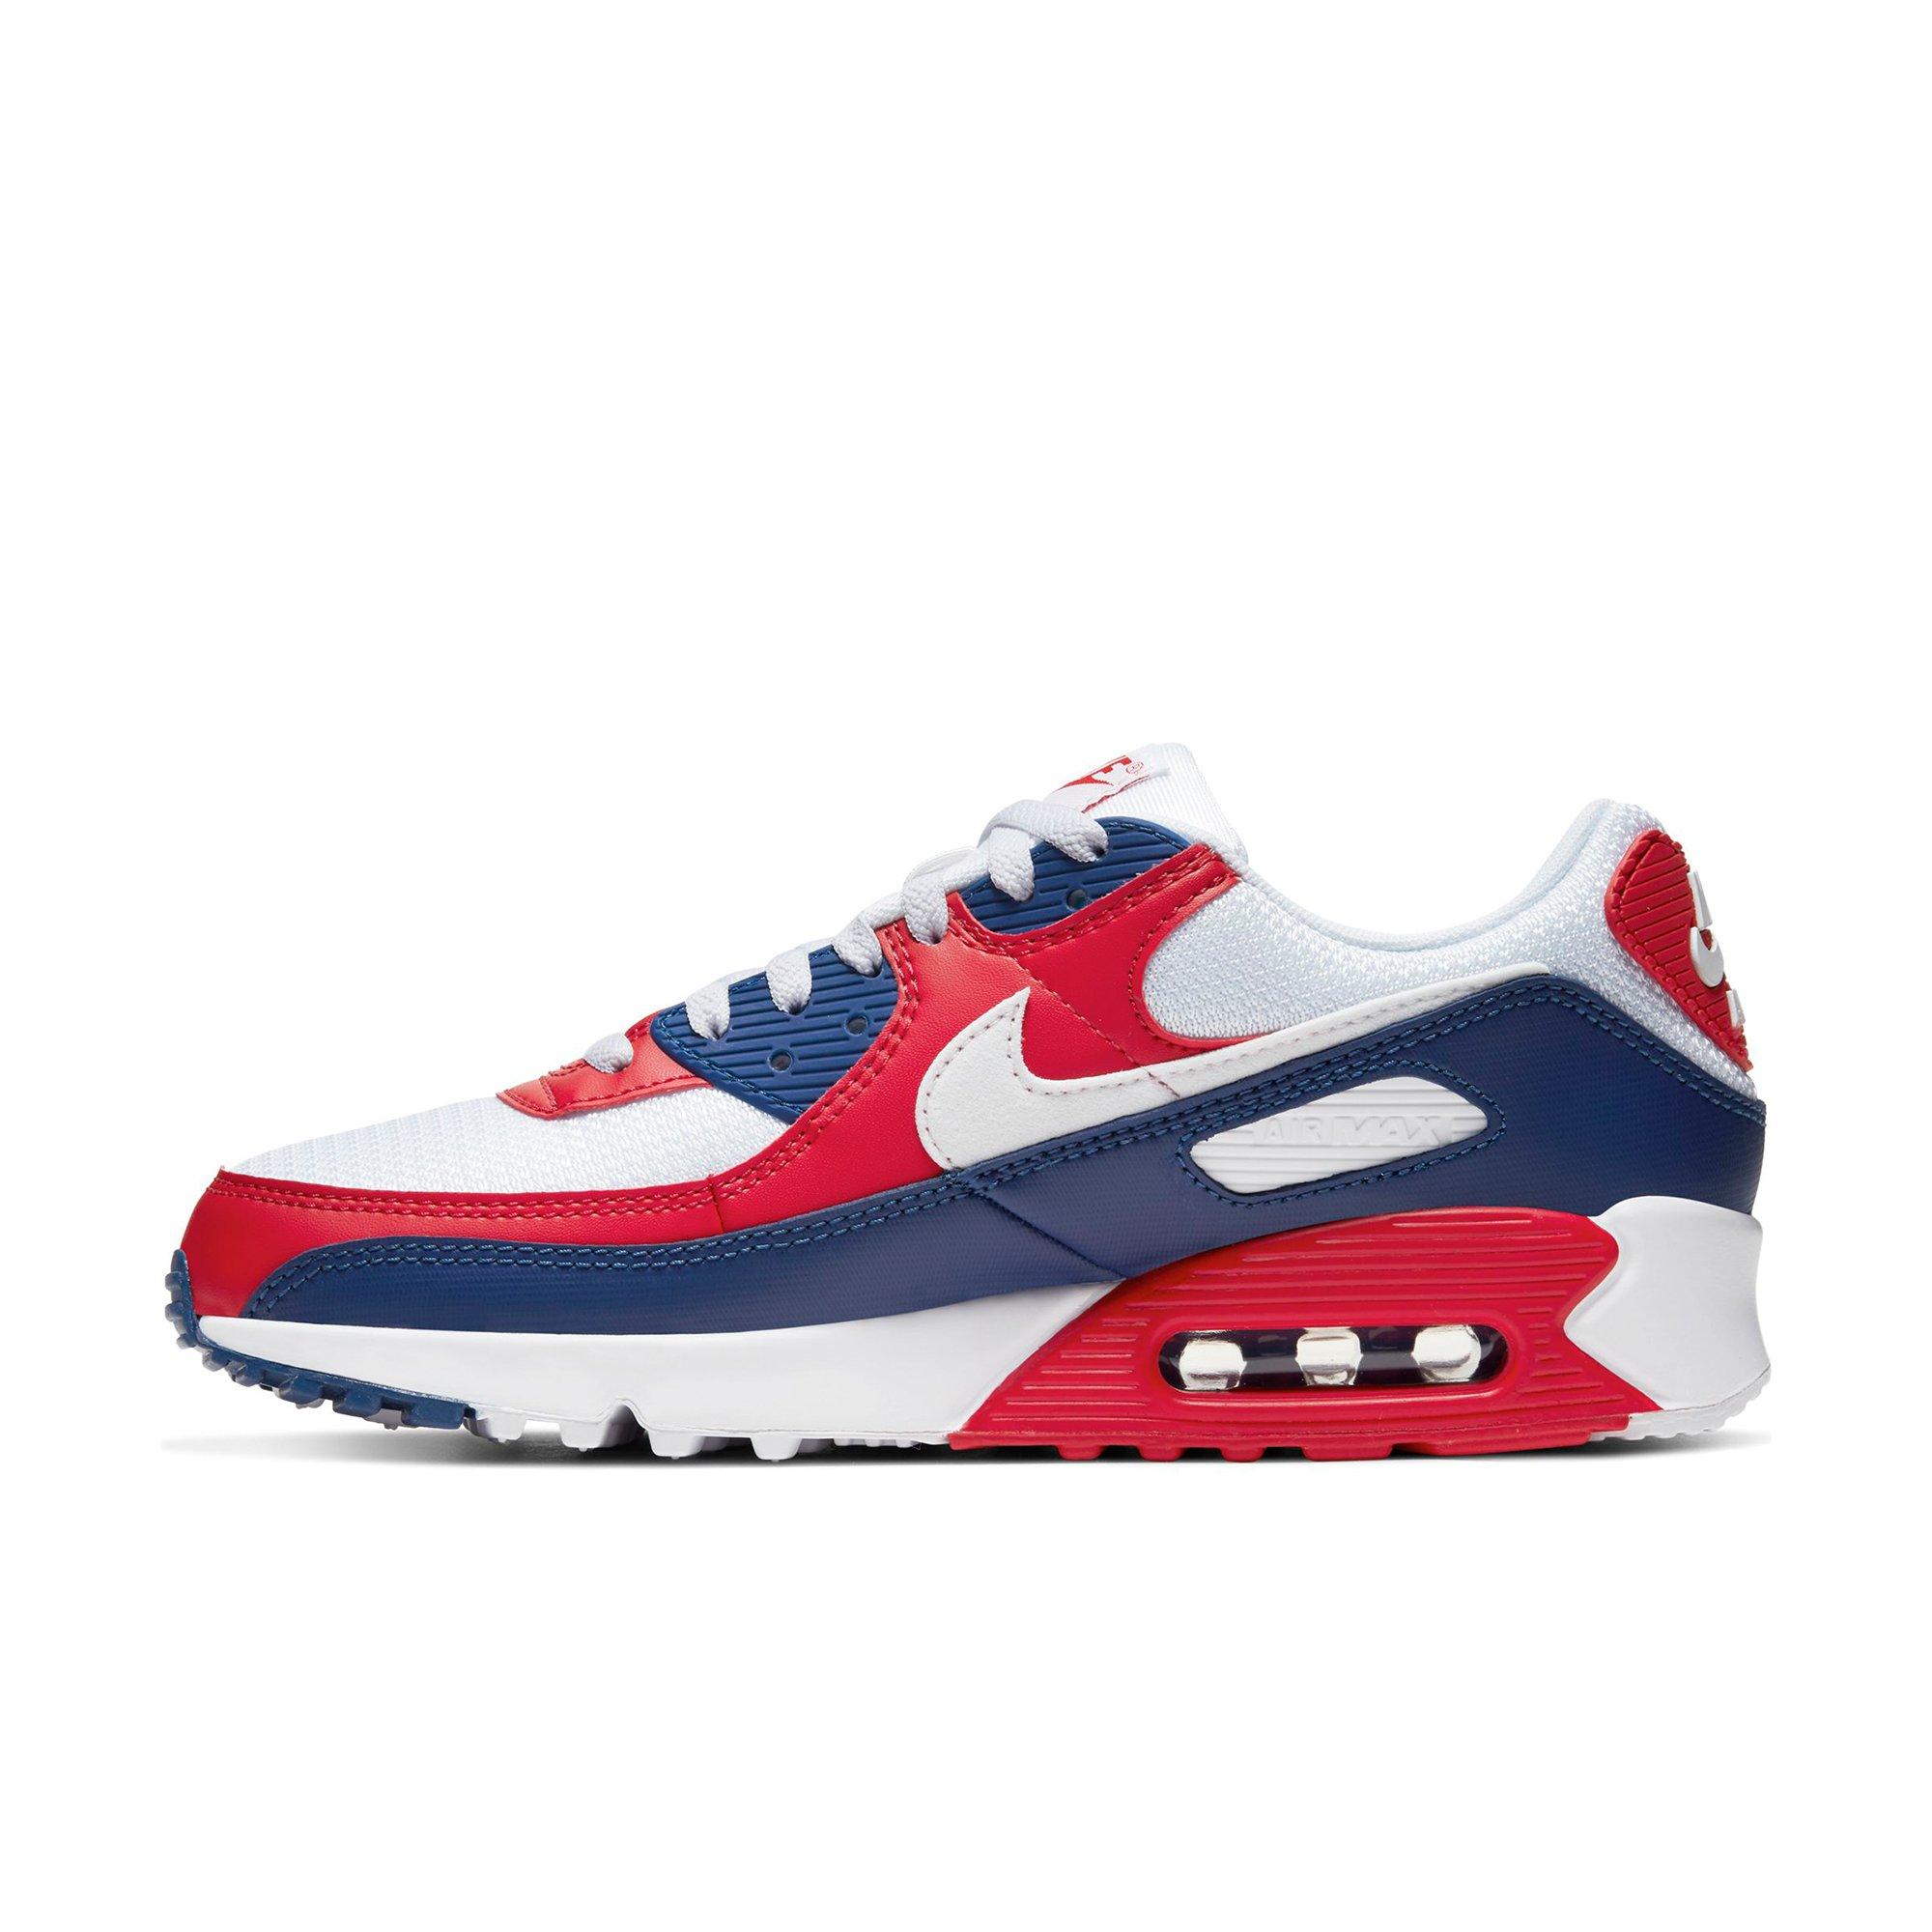 red white and blue air maxes